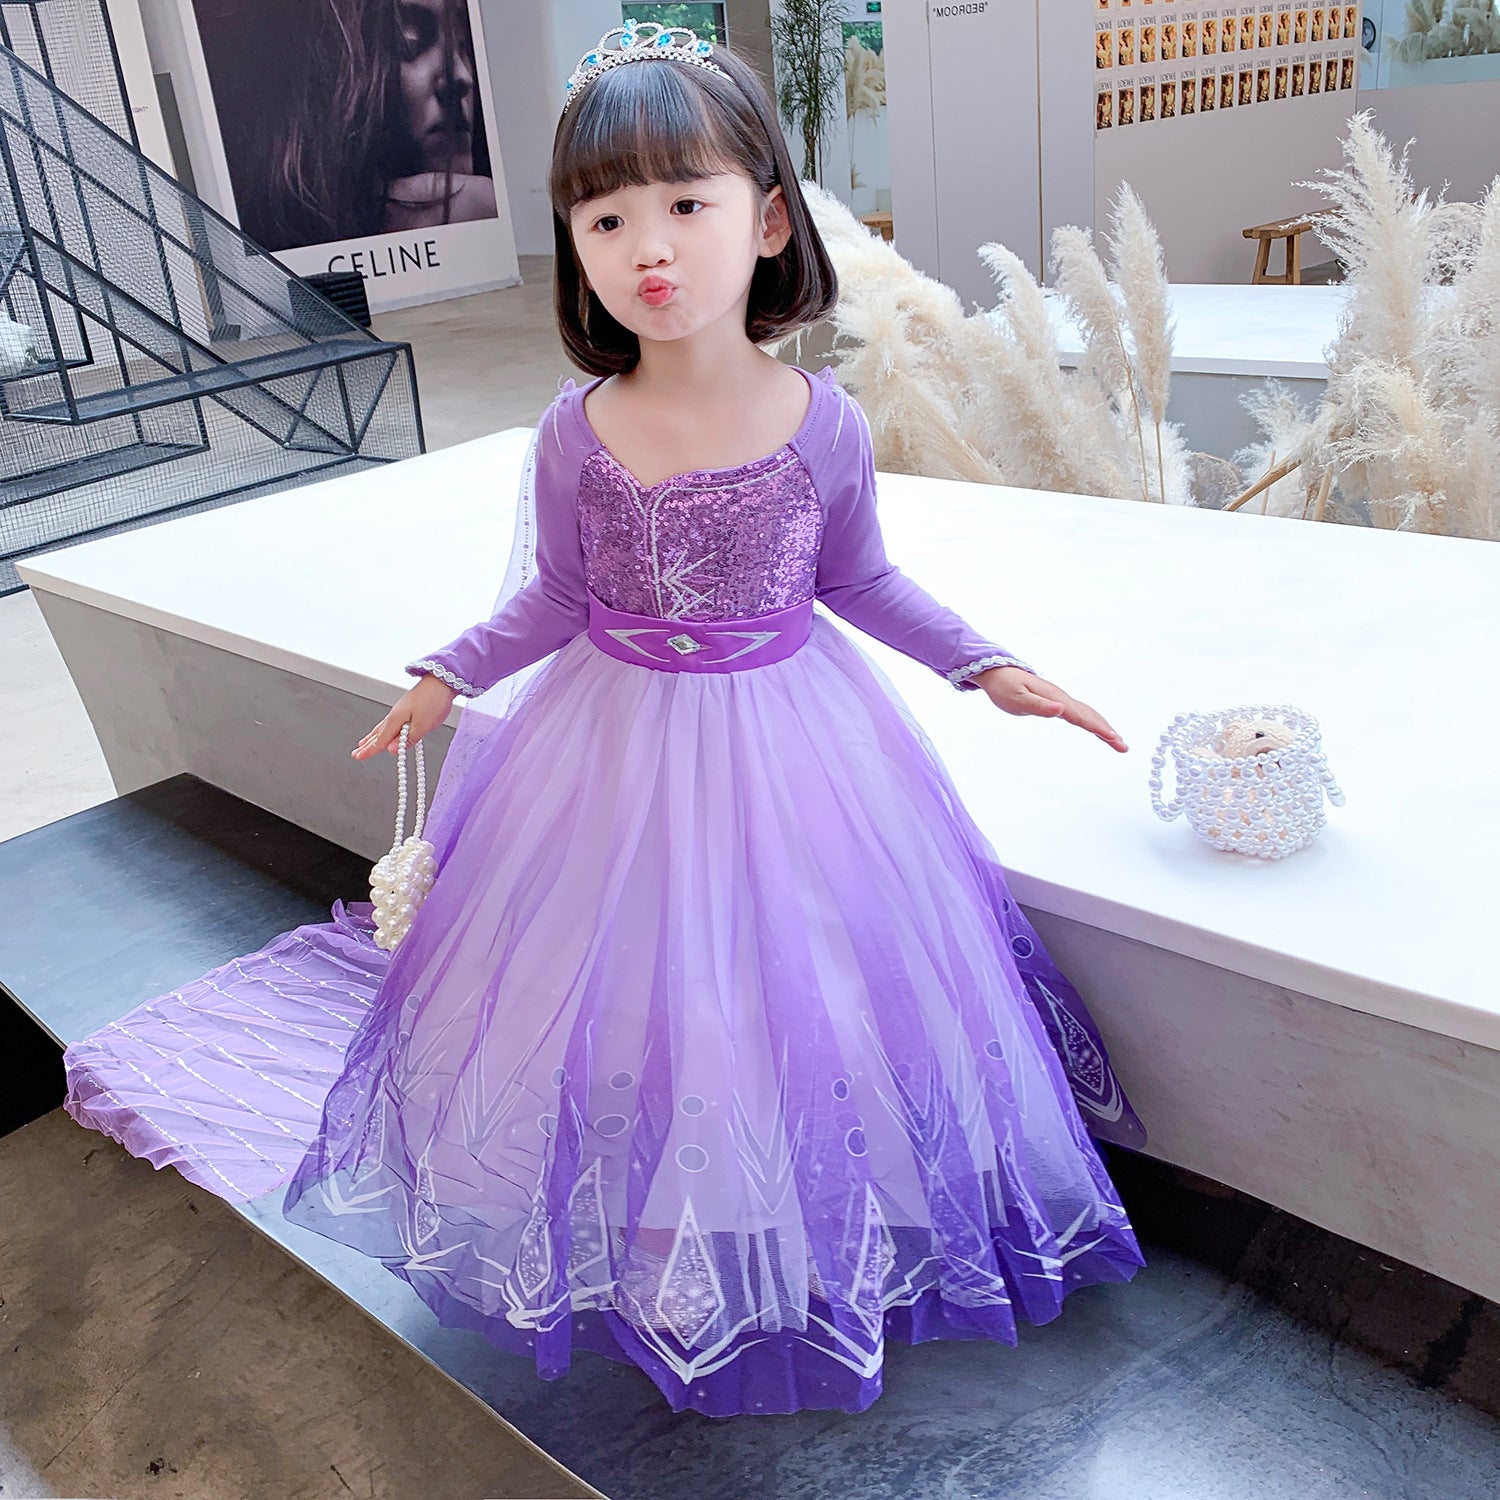 Frozen Princess Elsa dress with cape Dress Birthday Girl Costume Dresses For Cosplay Party Holiday Wedding